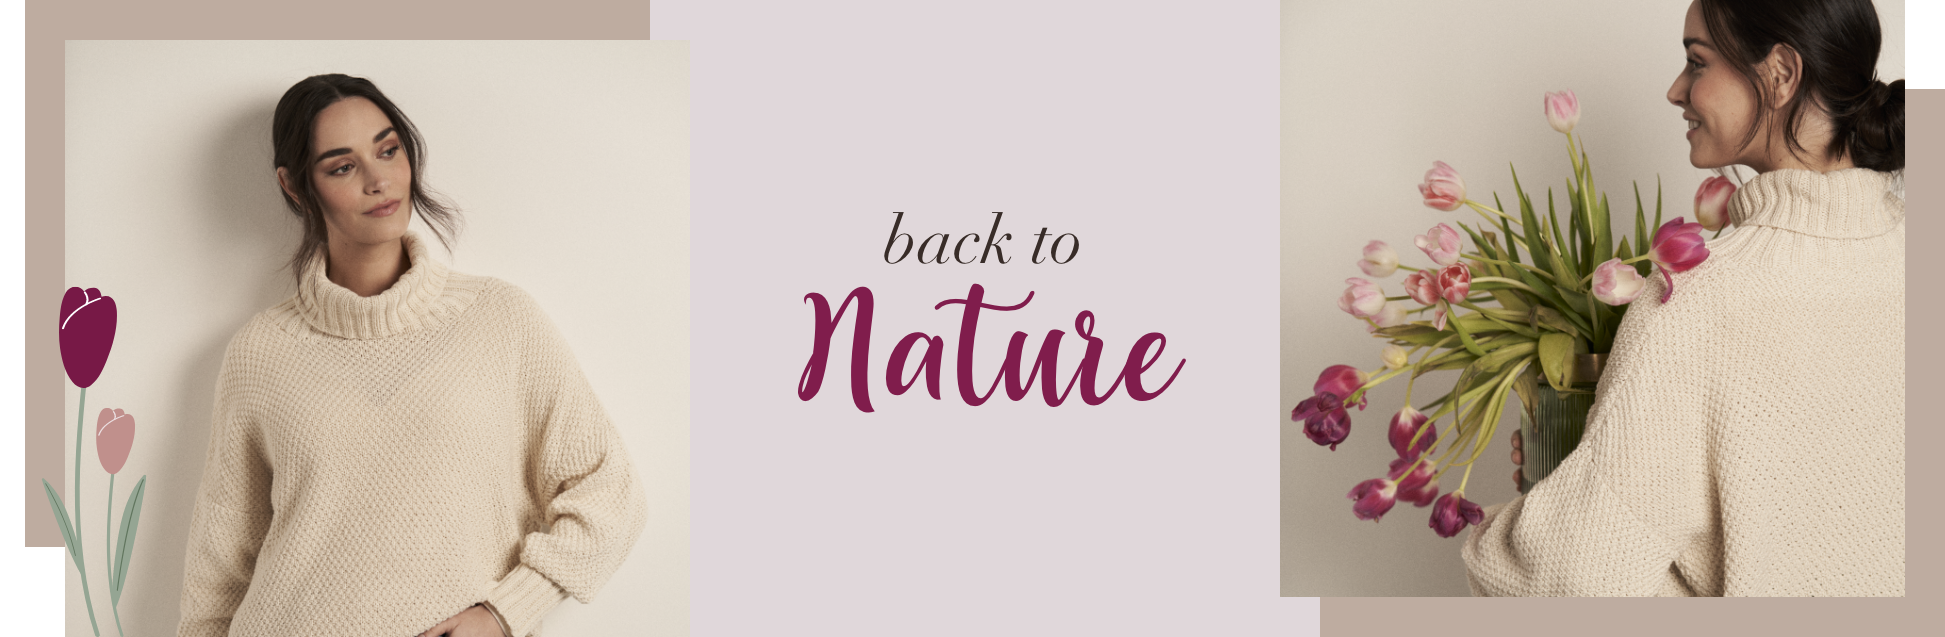 Back to Nature banner